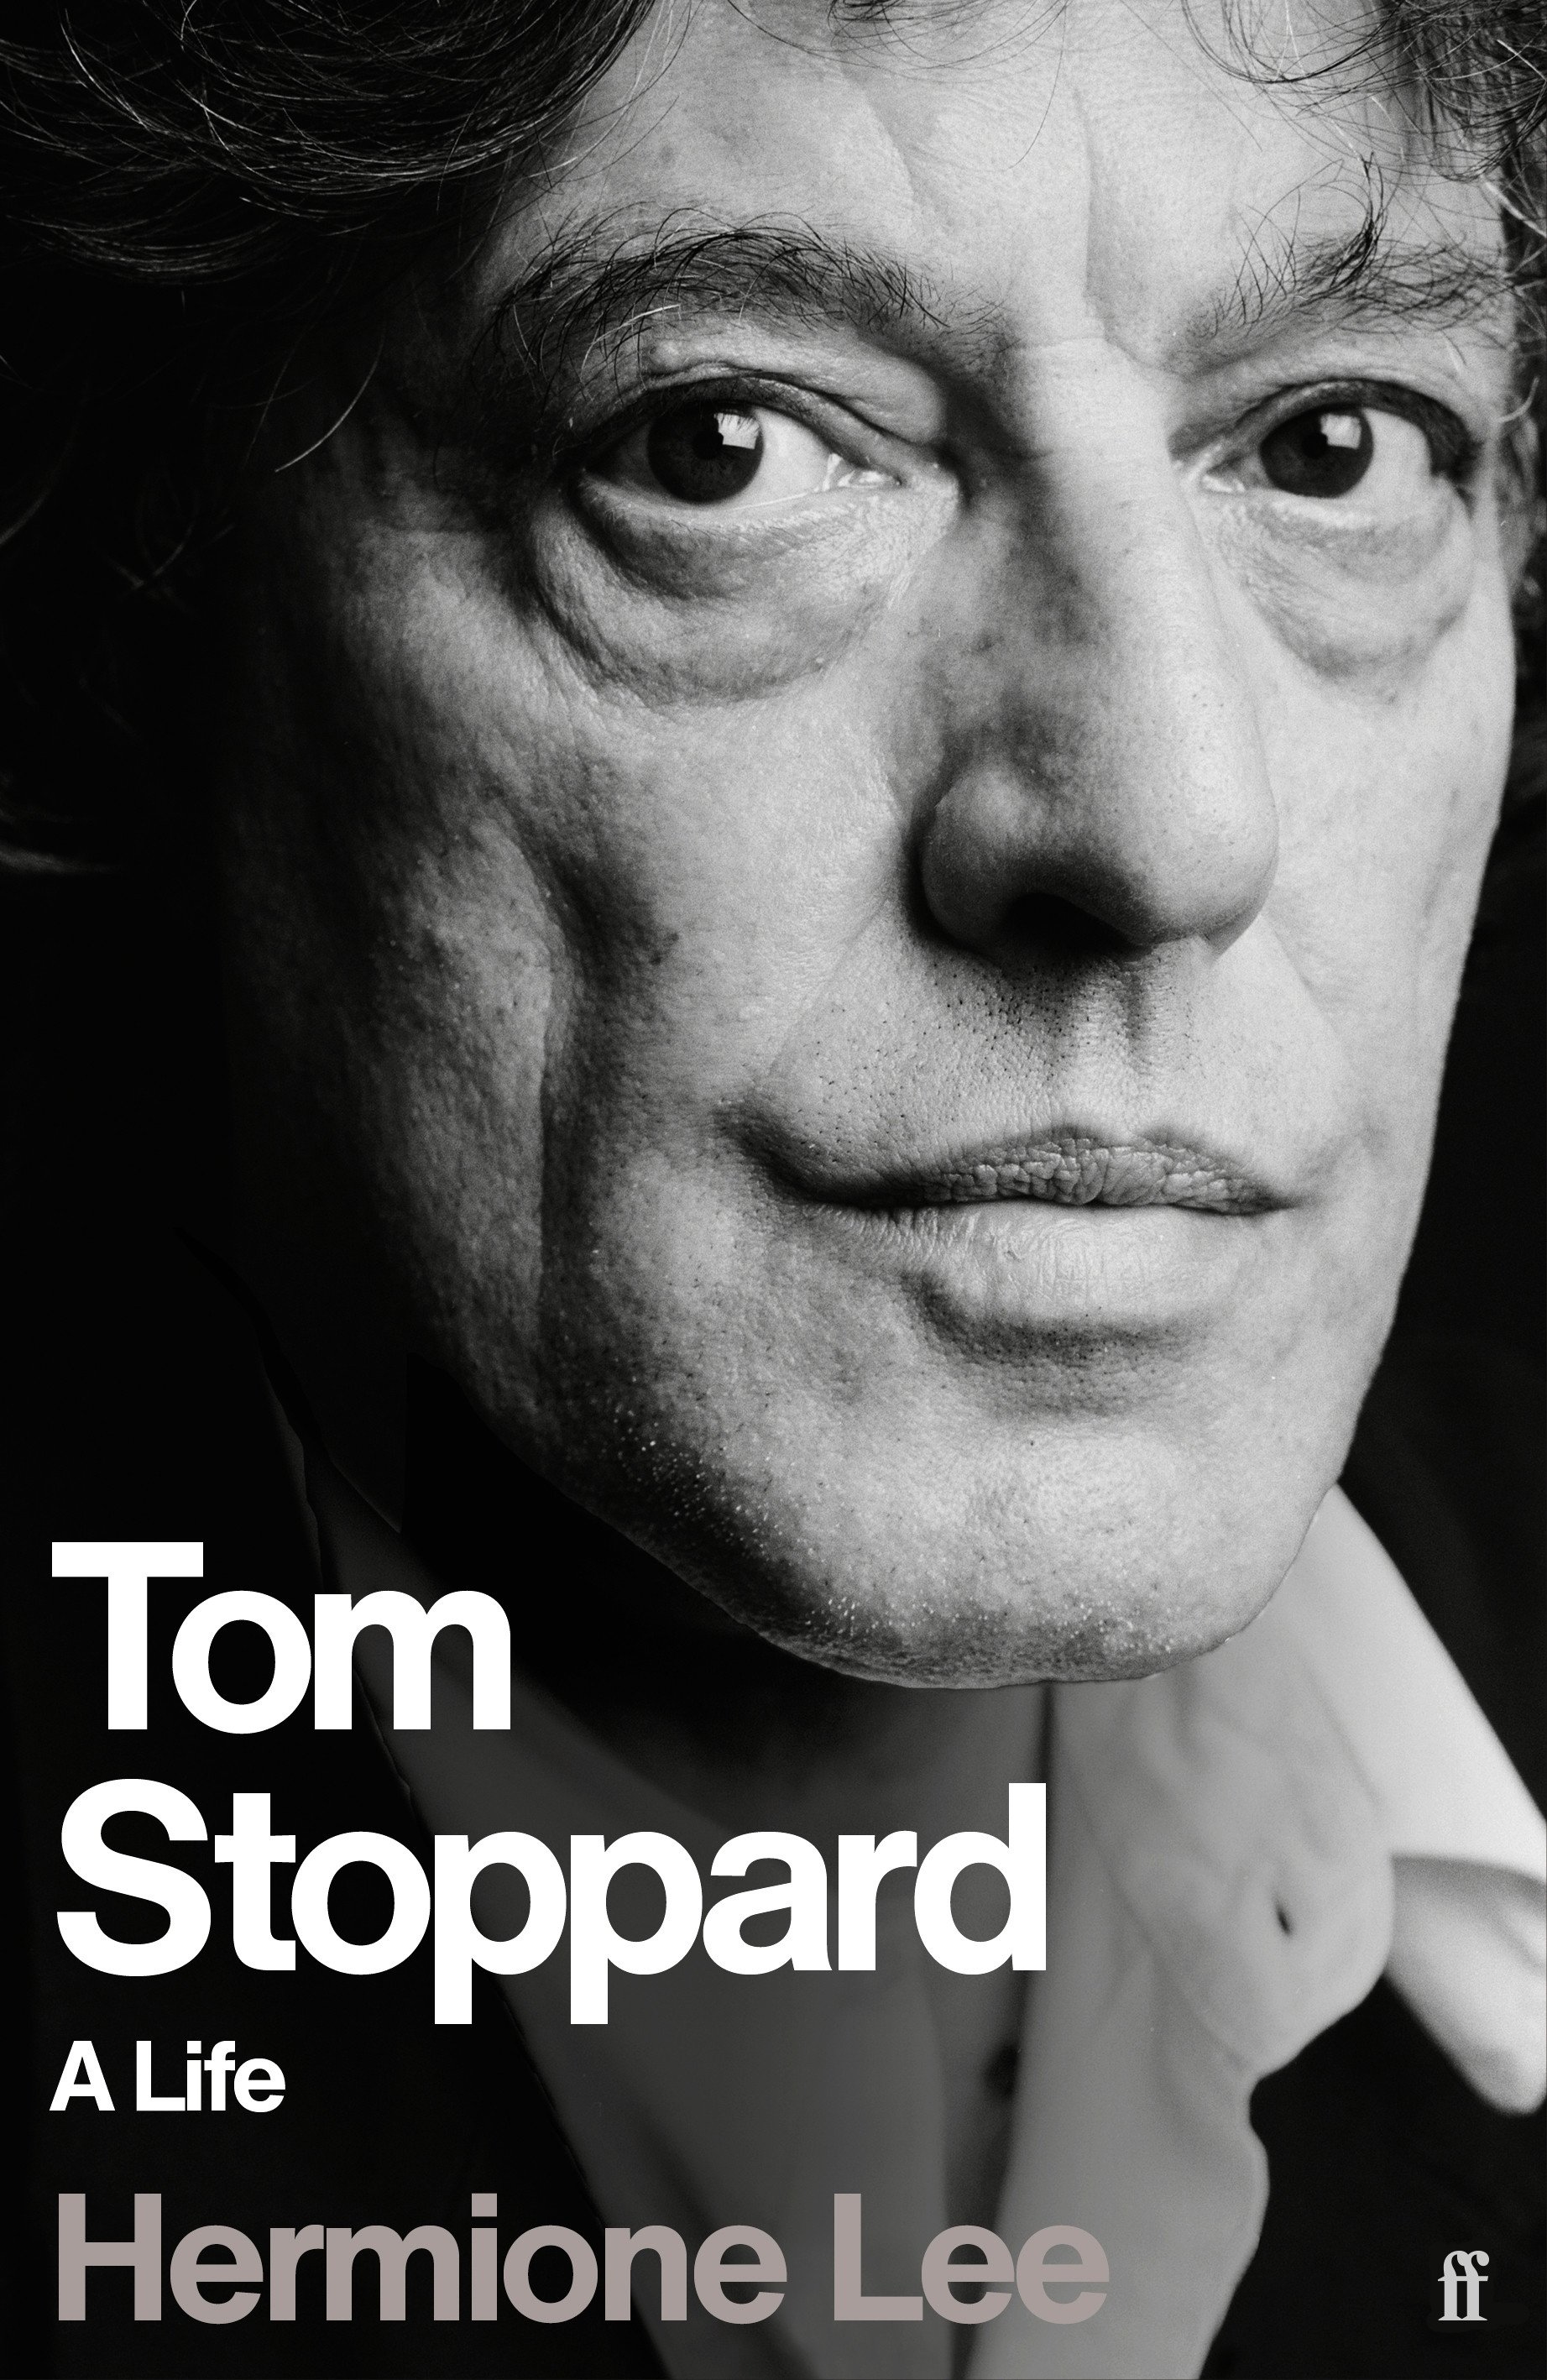 Tom Stoppard A Life by Hermione Lee